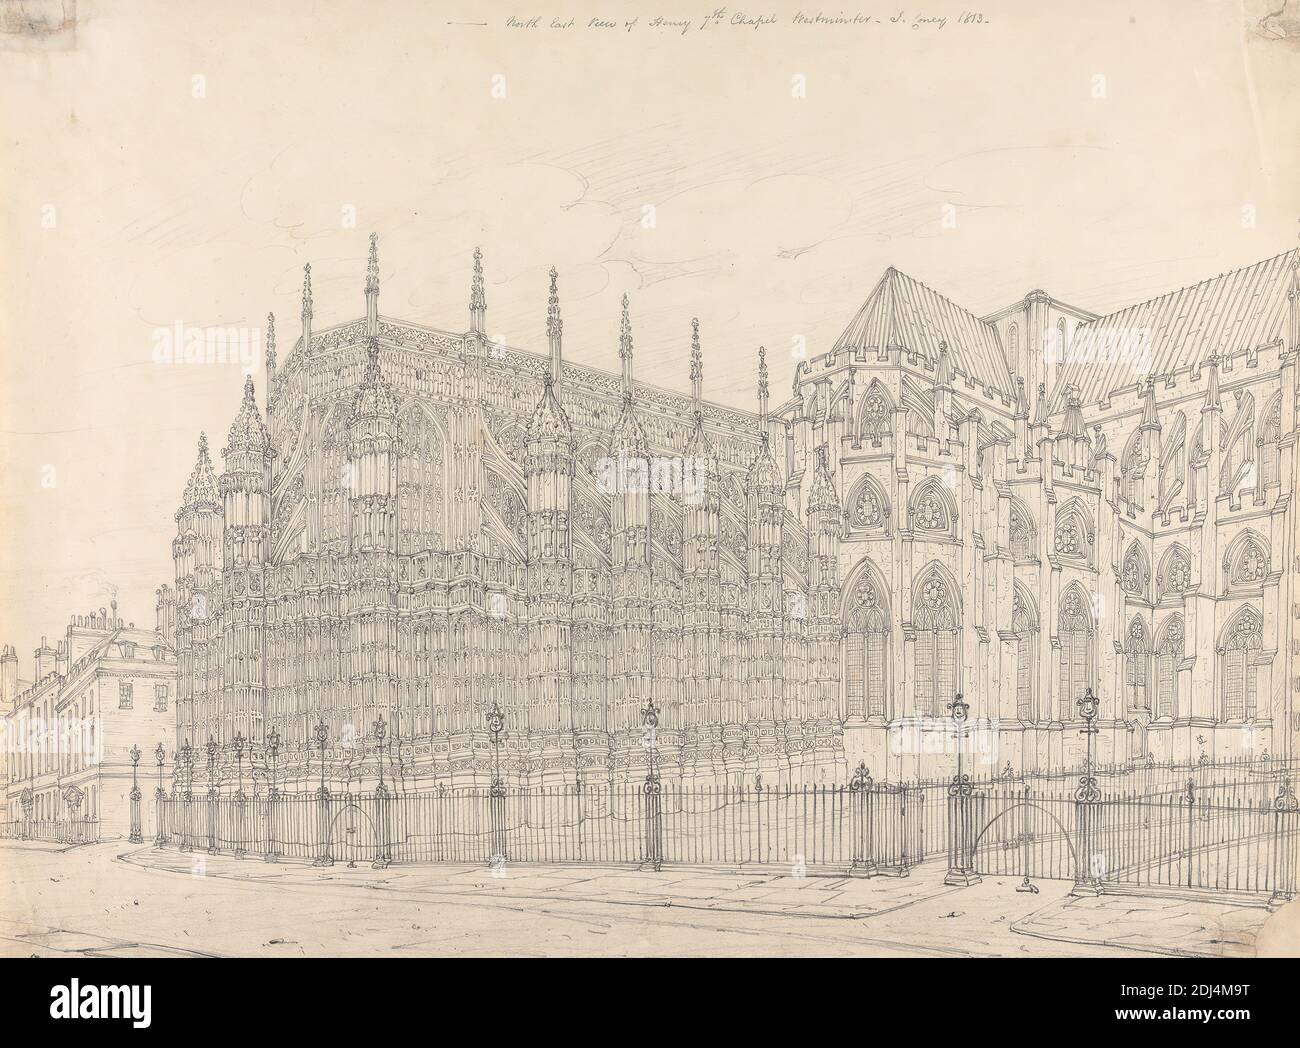 North East View of Henry VII Chapel Westminster, John Coney, 1786–1833, British, 1813, Graphite on smooth, medium, white wove paper, Sheet: 14 1/8 × 19 inches (35.9 × 48.3 cm), architectural subject, City of Westminster, England, London, Palace of Westminster, United Kingdom, Westminster Abbey Stock Photo